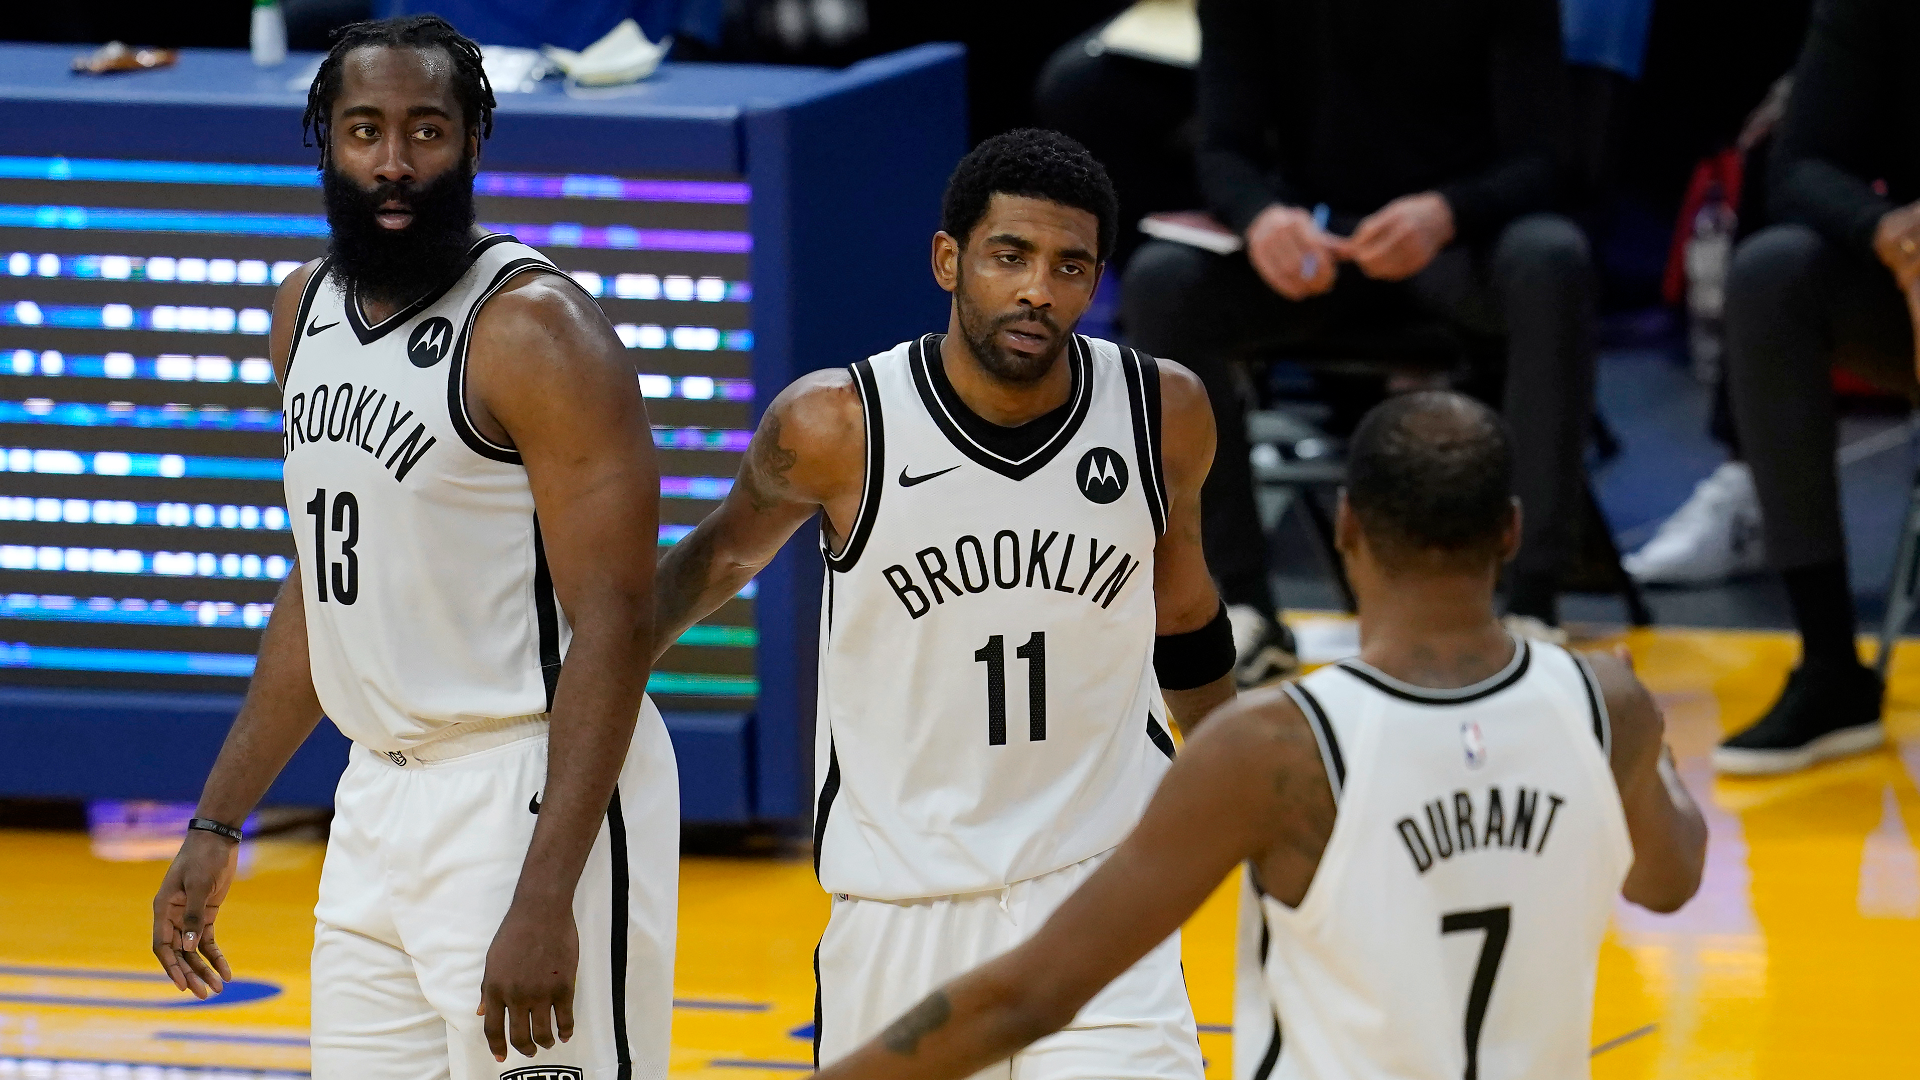 Kevin Durant has already signed an extension with the Brooklyn Nets and they are bullish on sealing deals for James Harden and Kyrie Irving.